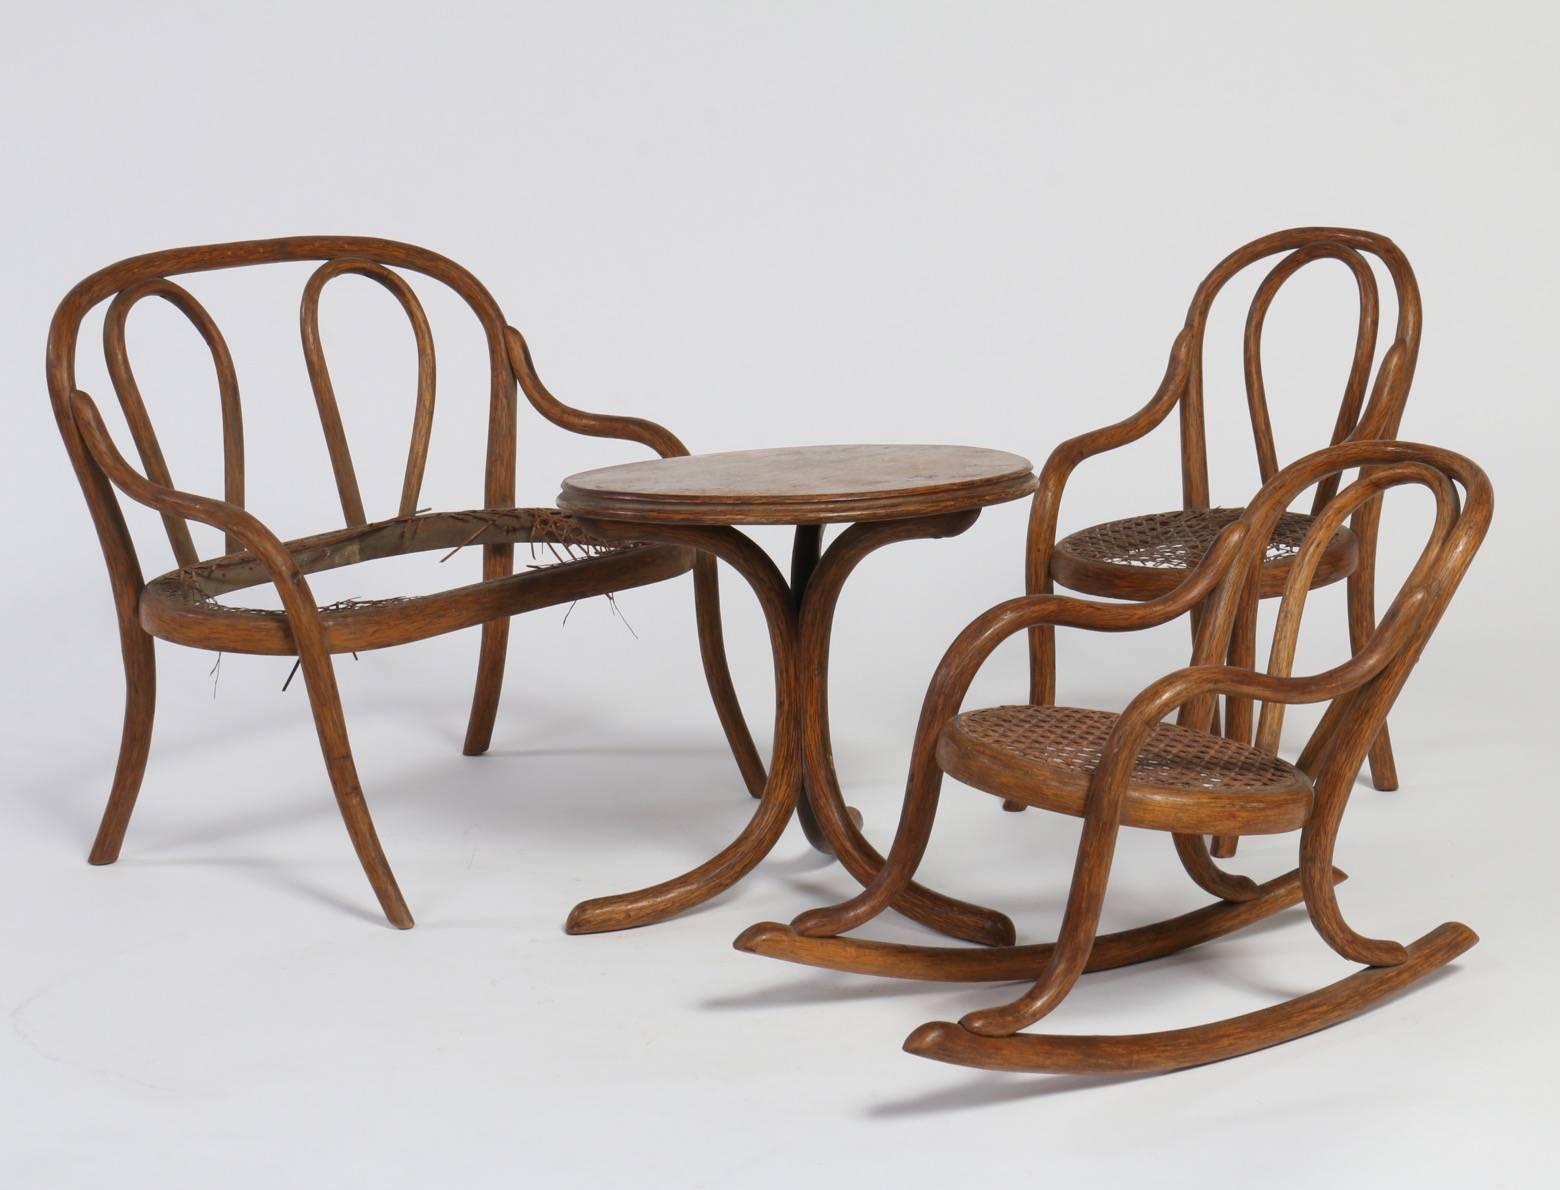 This is a rare set of doll furniture made by Thonet, the master of bentwood furniture and creator of the iconic bentwood chairs that altered the direction of furniture design. We estimate the manufacture date to be circa 1875. This four piece set is